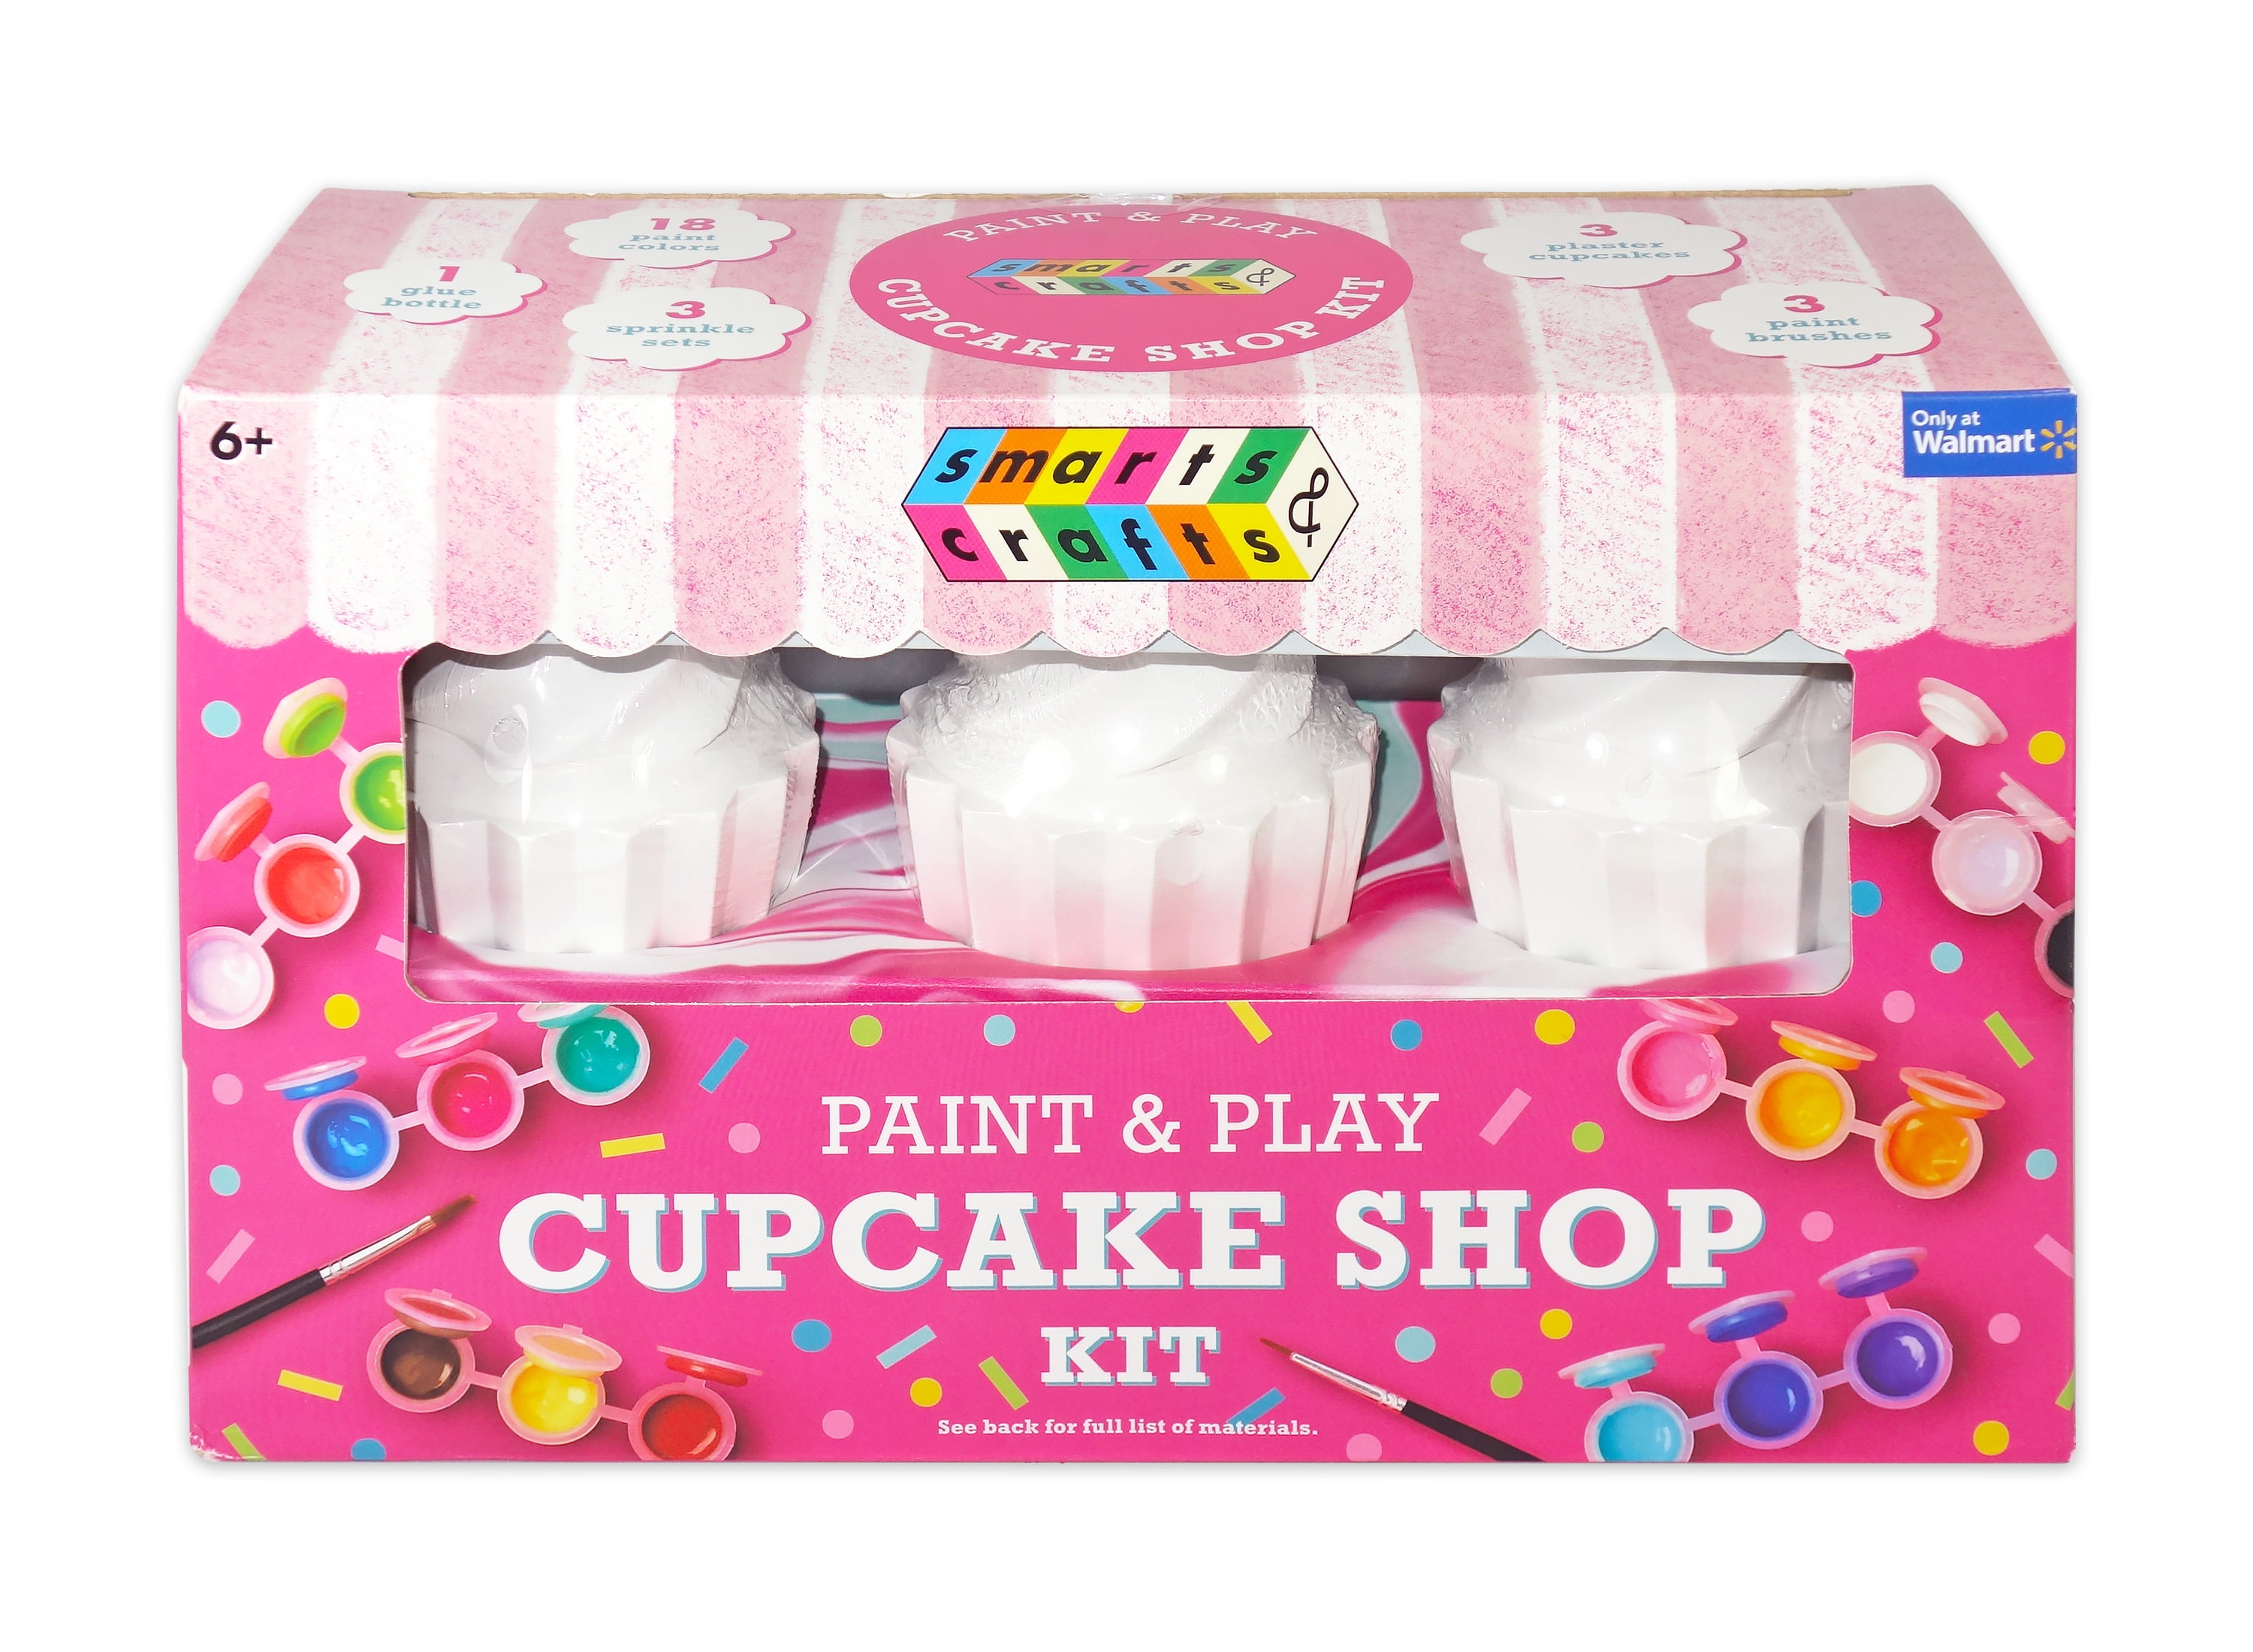 Creativity For Kids Paint By Number Kit 9X9 Cupcake Pop Art